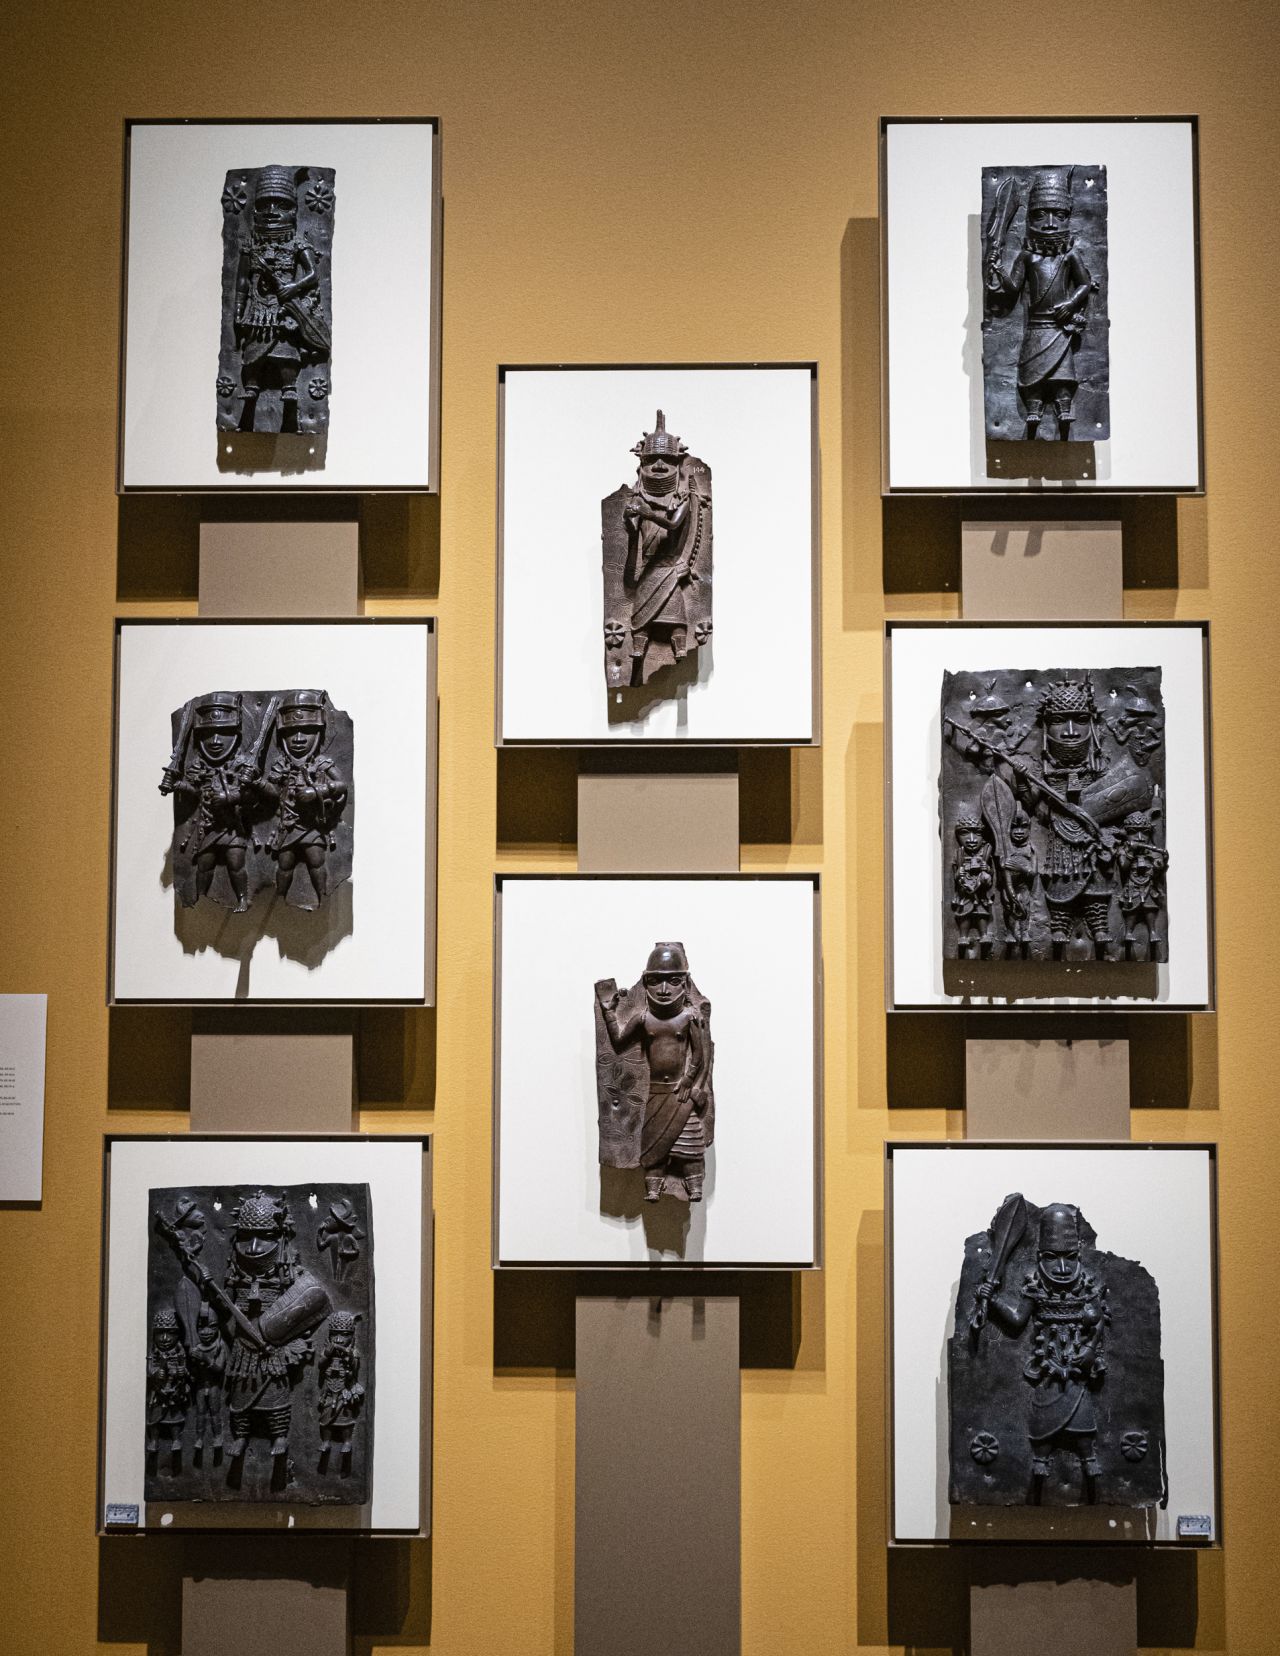 A selection of the Benin bronzes returned to Nigeria's National Commission for Museums and Monuments.